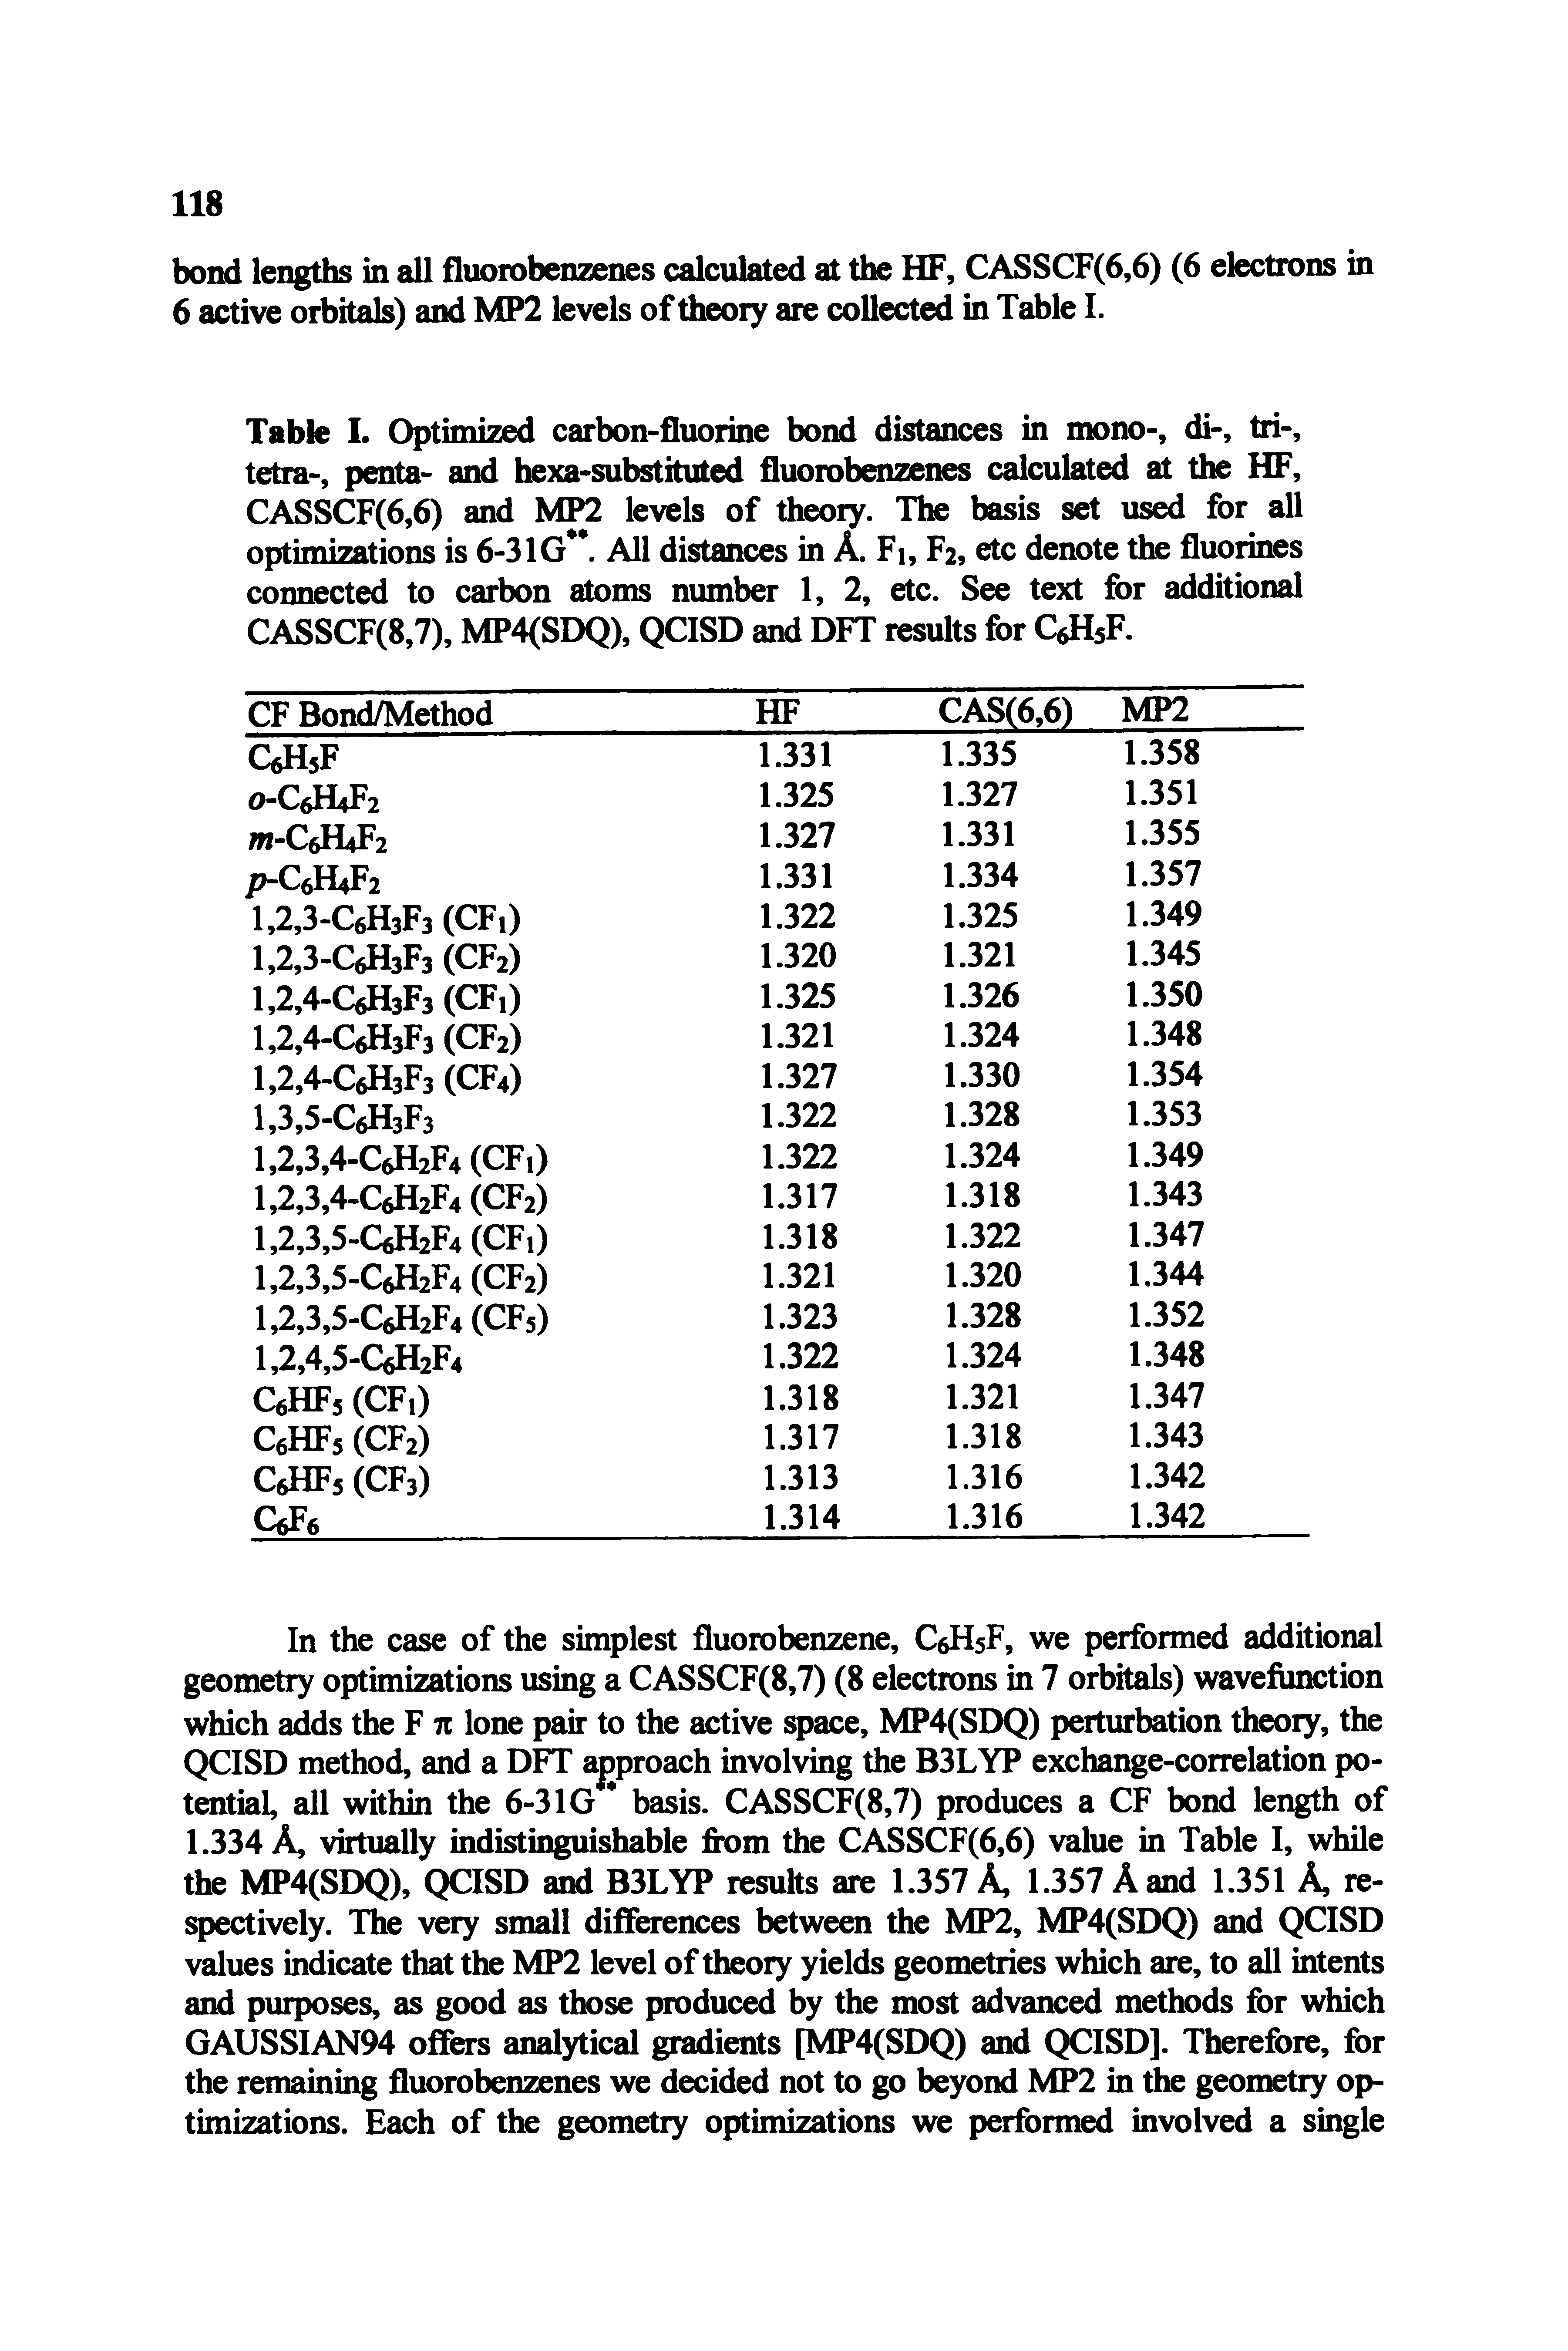 Table I. Optimized carbon-fluorine bond distances in mono-, di-, tri-, tetra-, penta- and hexa-substituted fluorobenzenes calculated at the HF, CASSCF(6,6) and MP2 levels of theory. The basis set used for all optimizations is 6-31G. All distances in A. Fi, F2, etc denote the fluorines connected to carbon atoms number 1, 2, etc. See text for additional CASSCF(8,7), MP4(SDQ), QCISD and DFT results for QH5F.